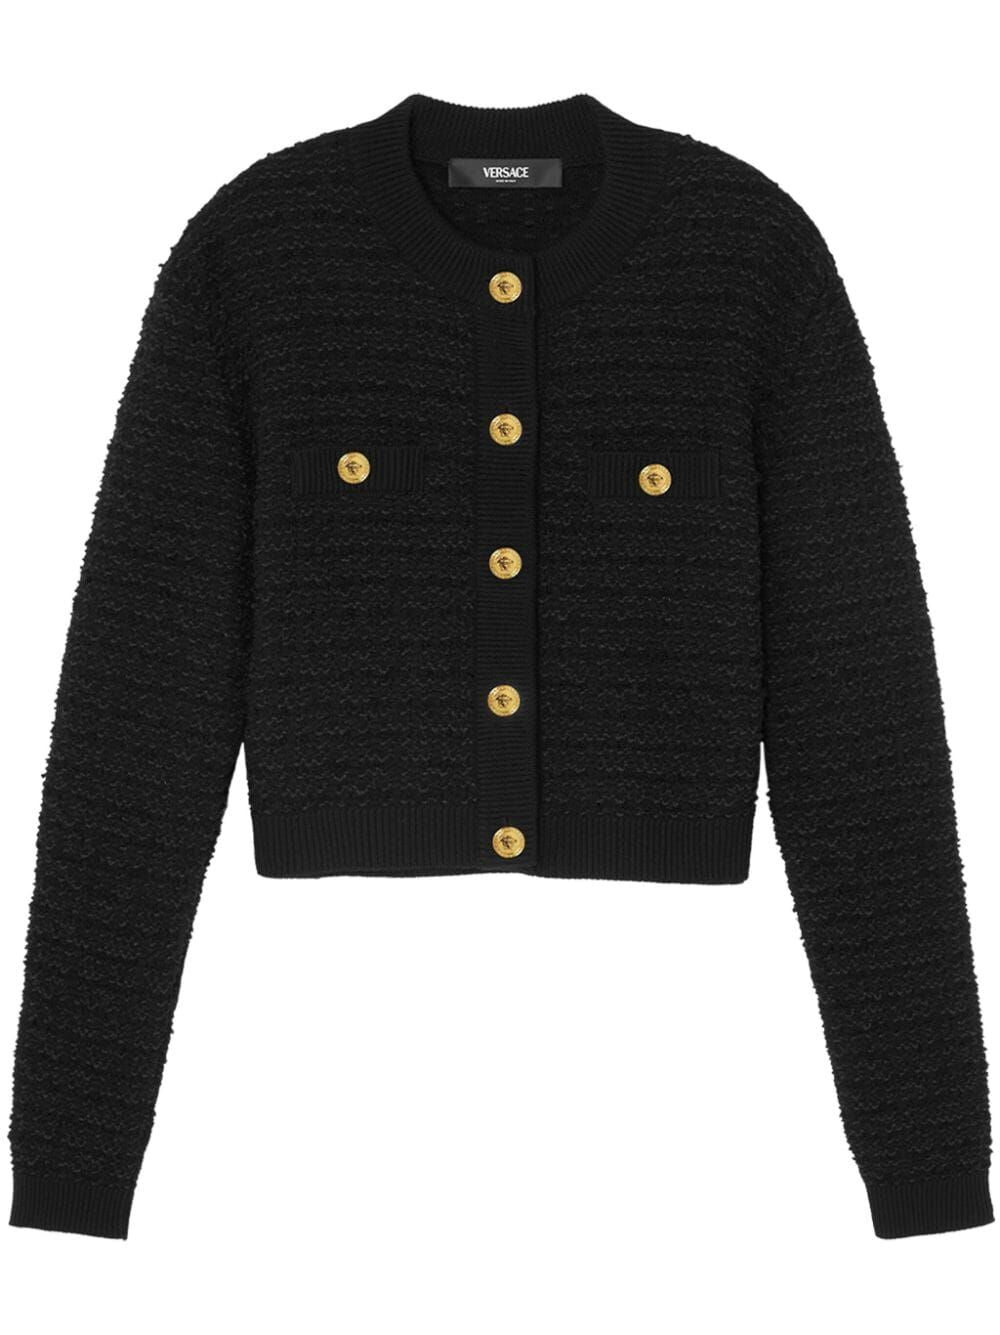 Knit Sweater College Tweed